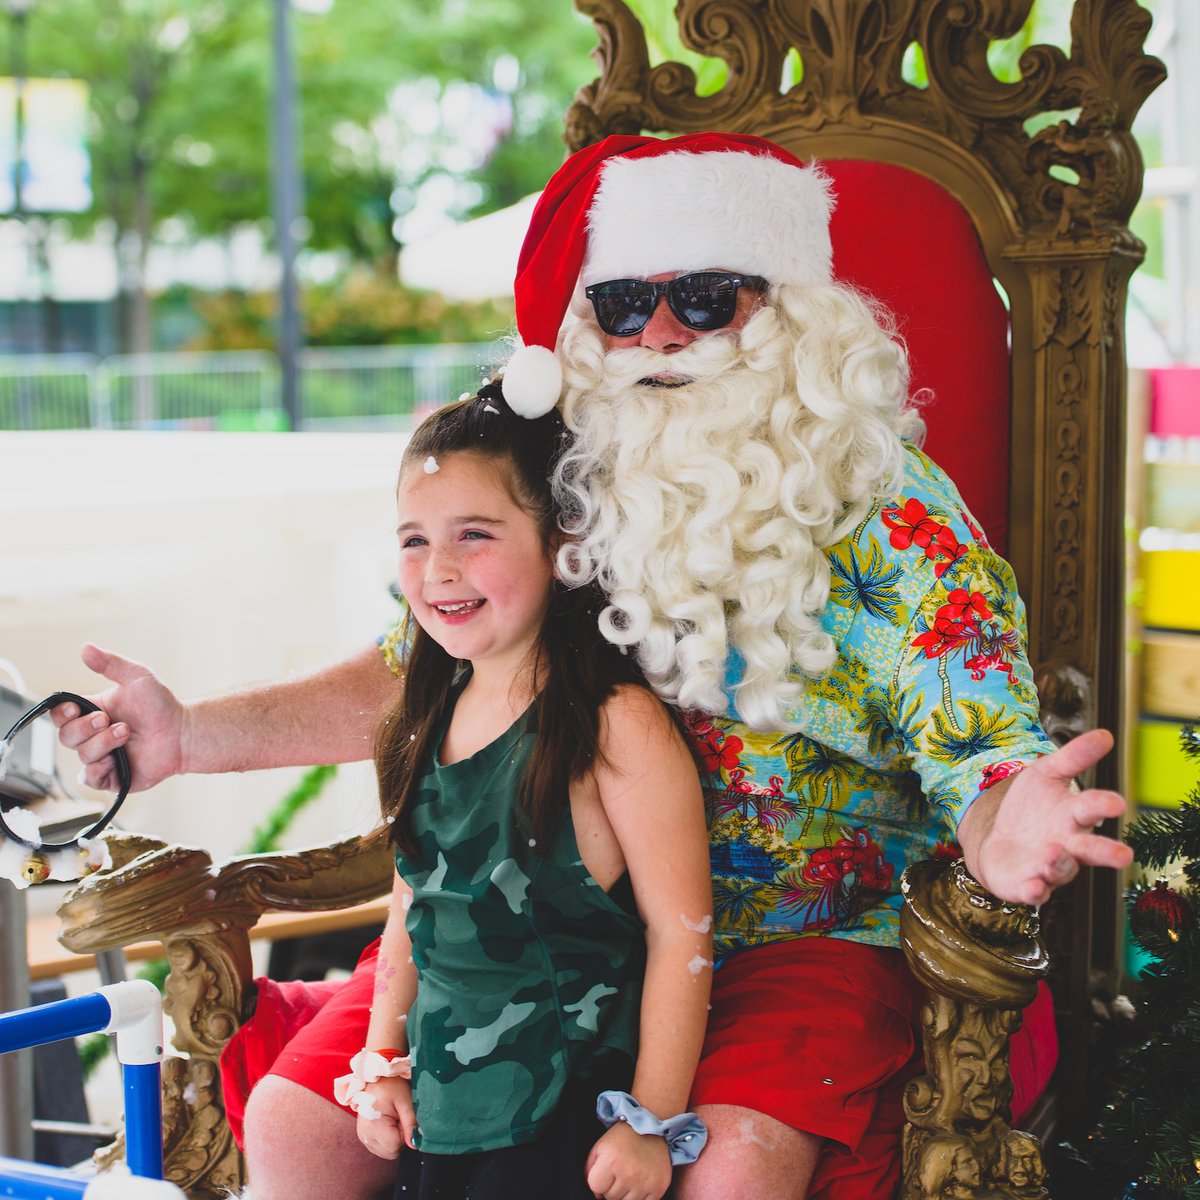 It's summertime and Santa's swapping his reindeer for rollerskates! Christmas in July Skate presented by @RothmanOrtho is HERE this Saturday, July 8, starting at 1:30pm! https://t.co/VBqJb1Xpk5 https://t.co/LTMKAbiY7L